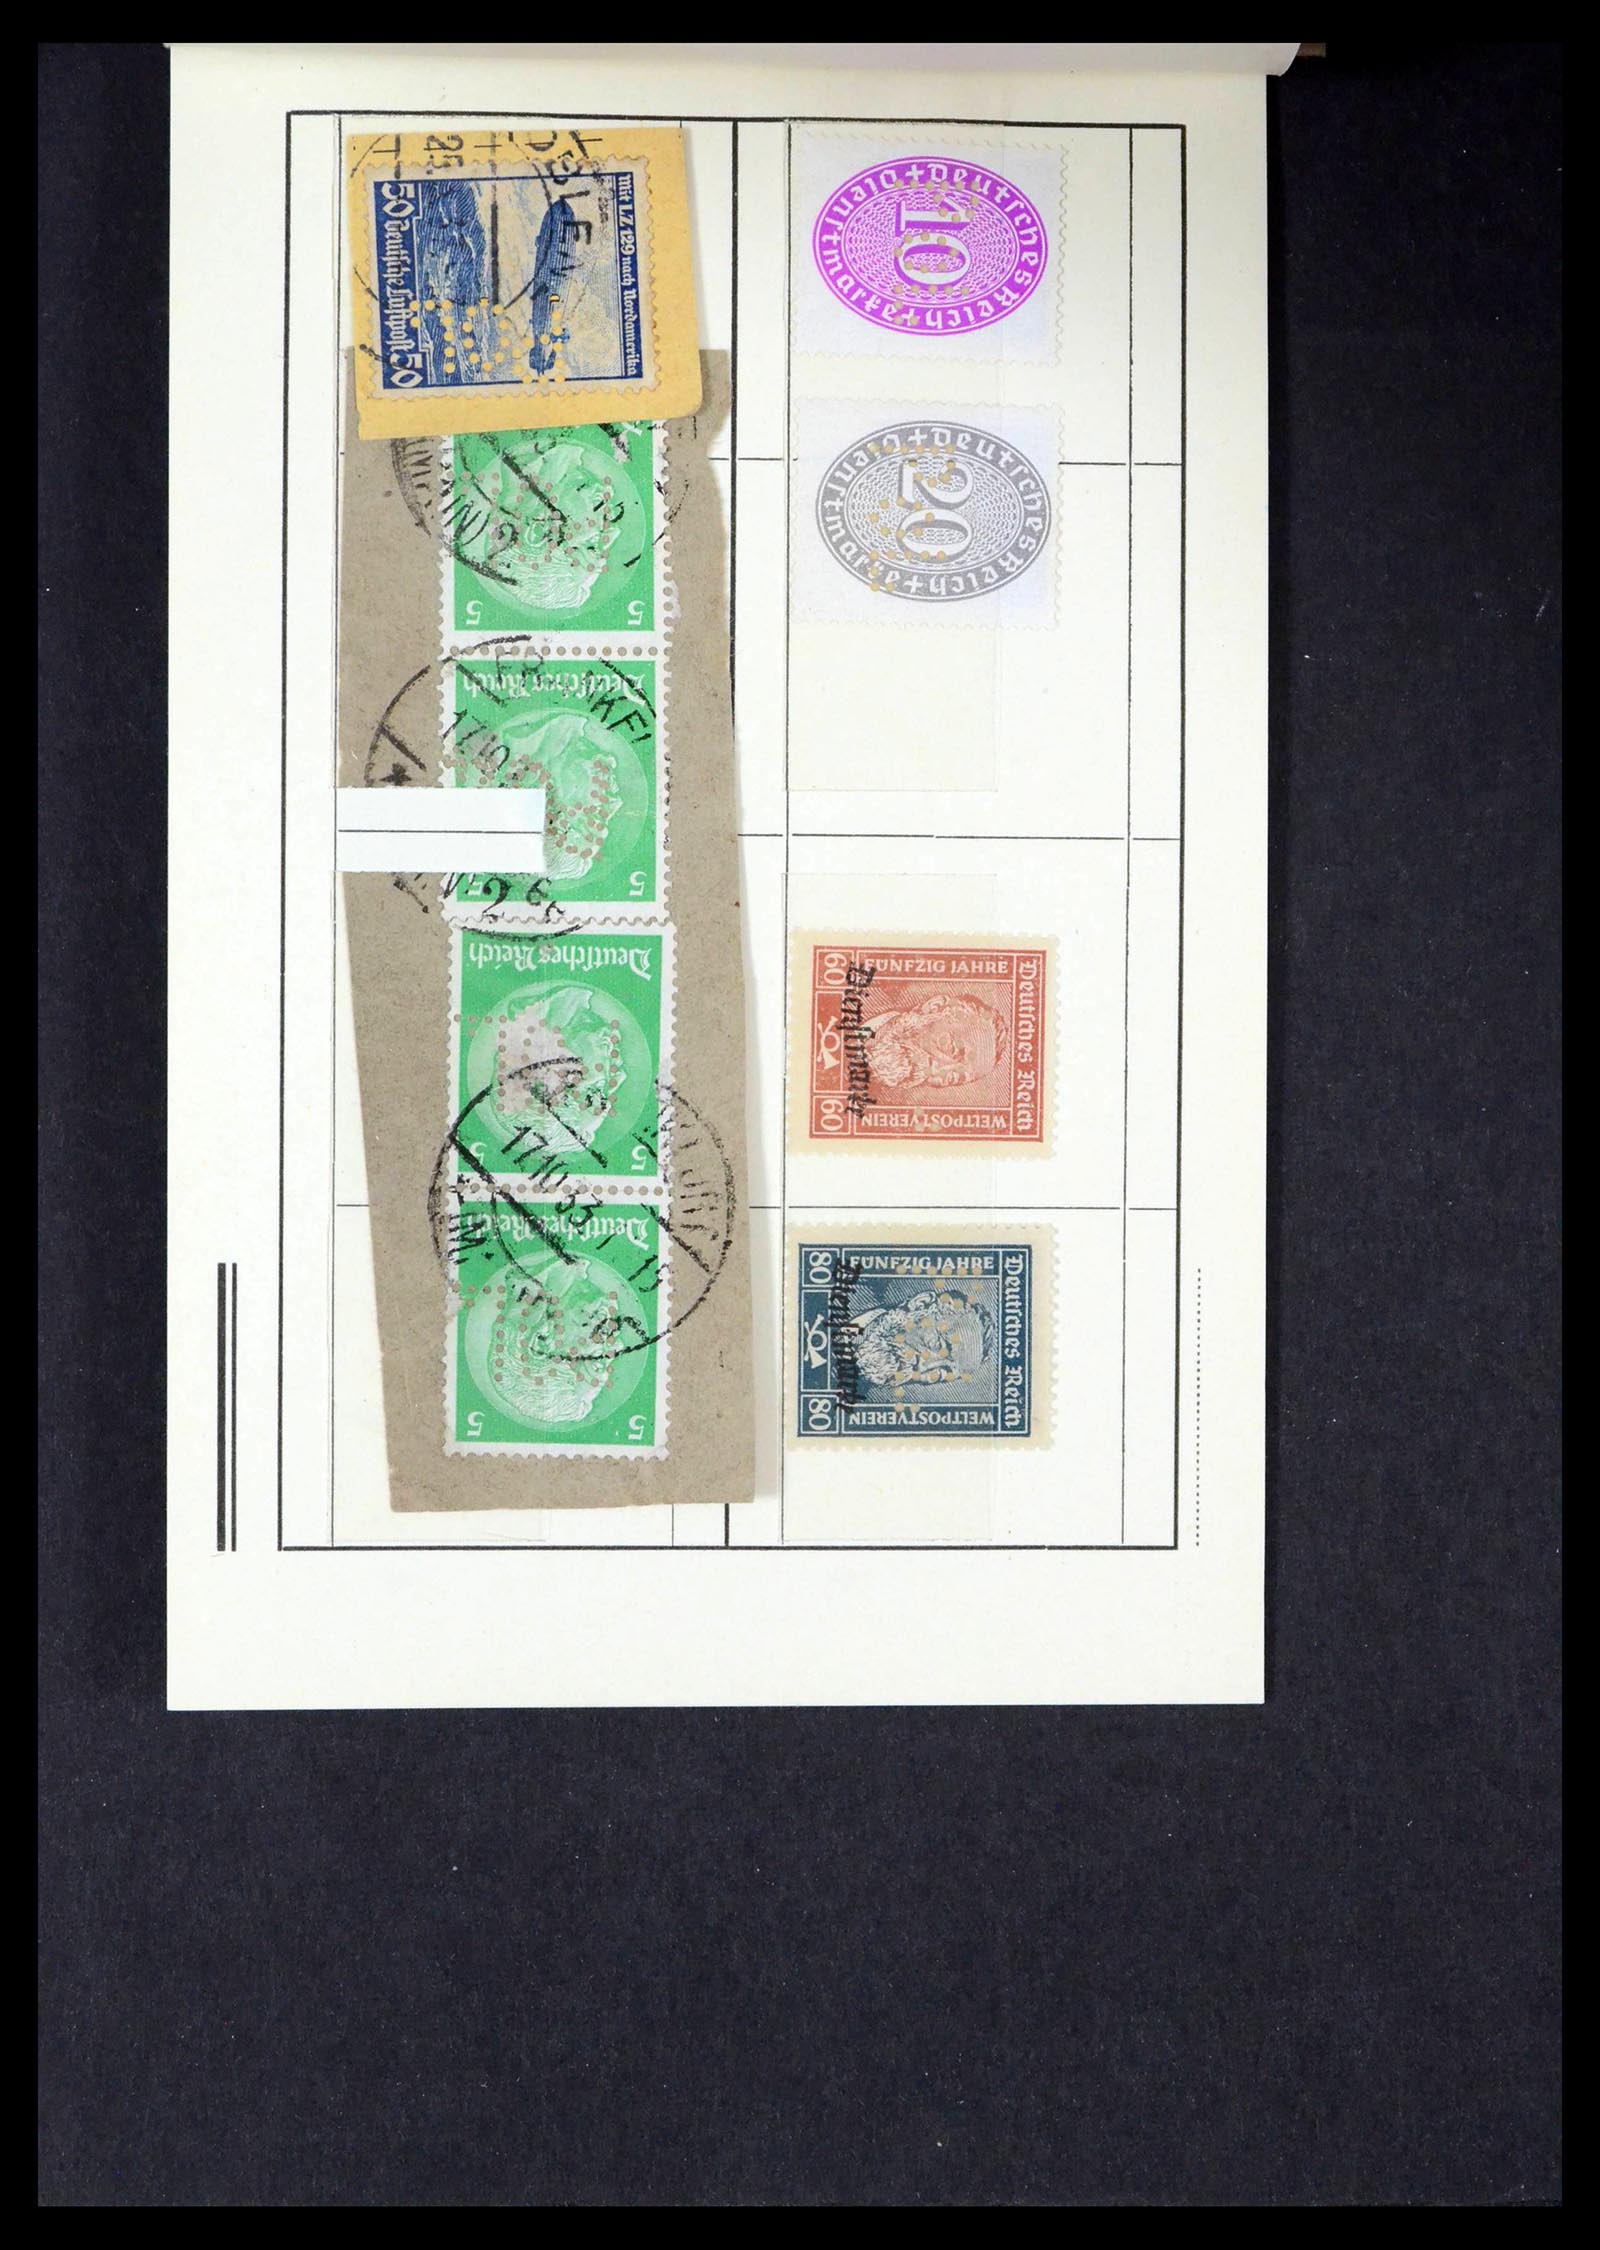 39458 0023 - Stamp collection 39458 Germany POL lochungen 1926-1955.